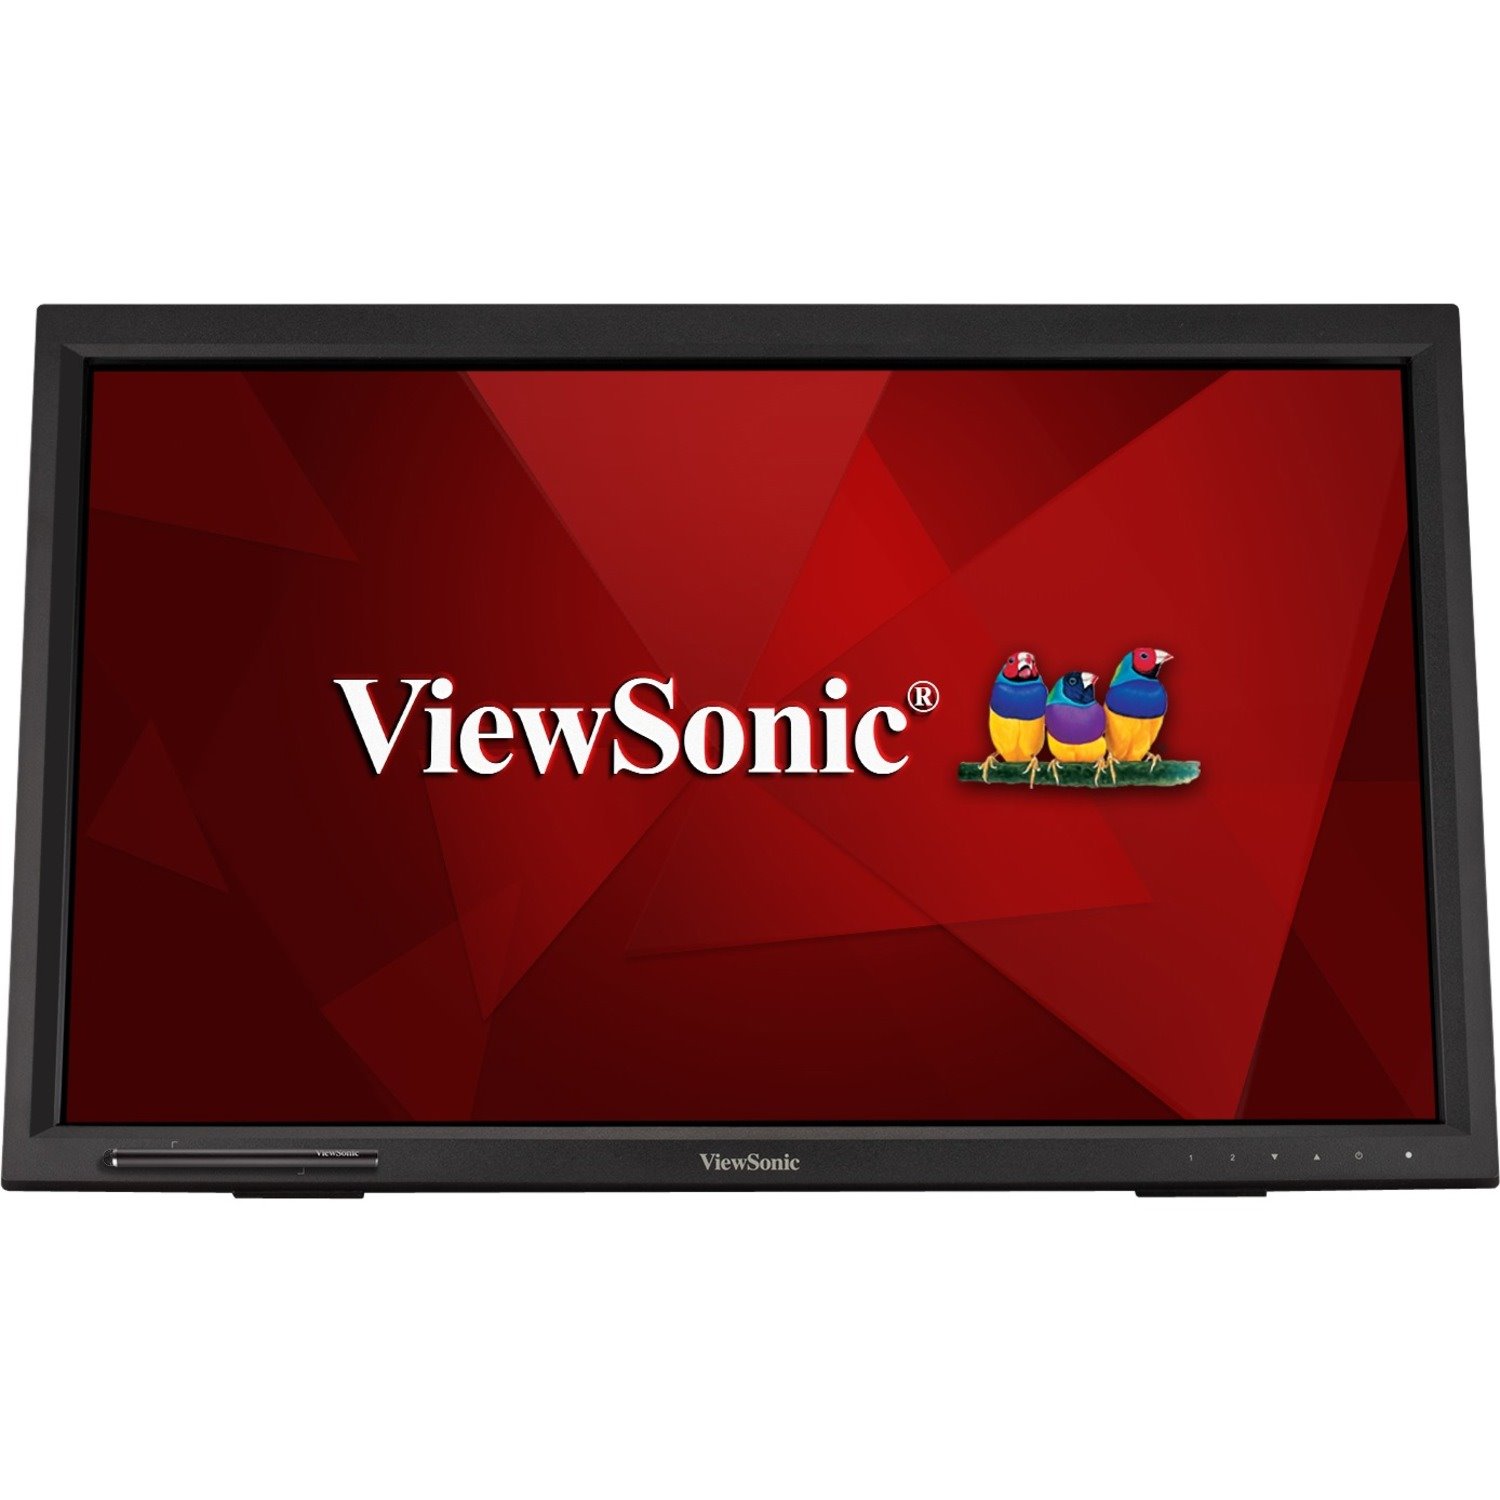 ViewSonic TD2423d 24" 1080p 10-Point Multi IR Touch Monitor with HDMI, VGA, and DP